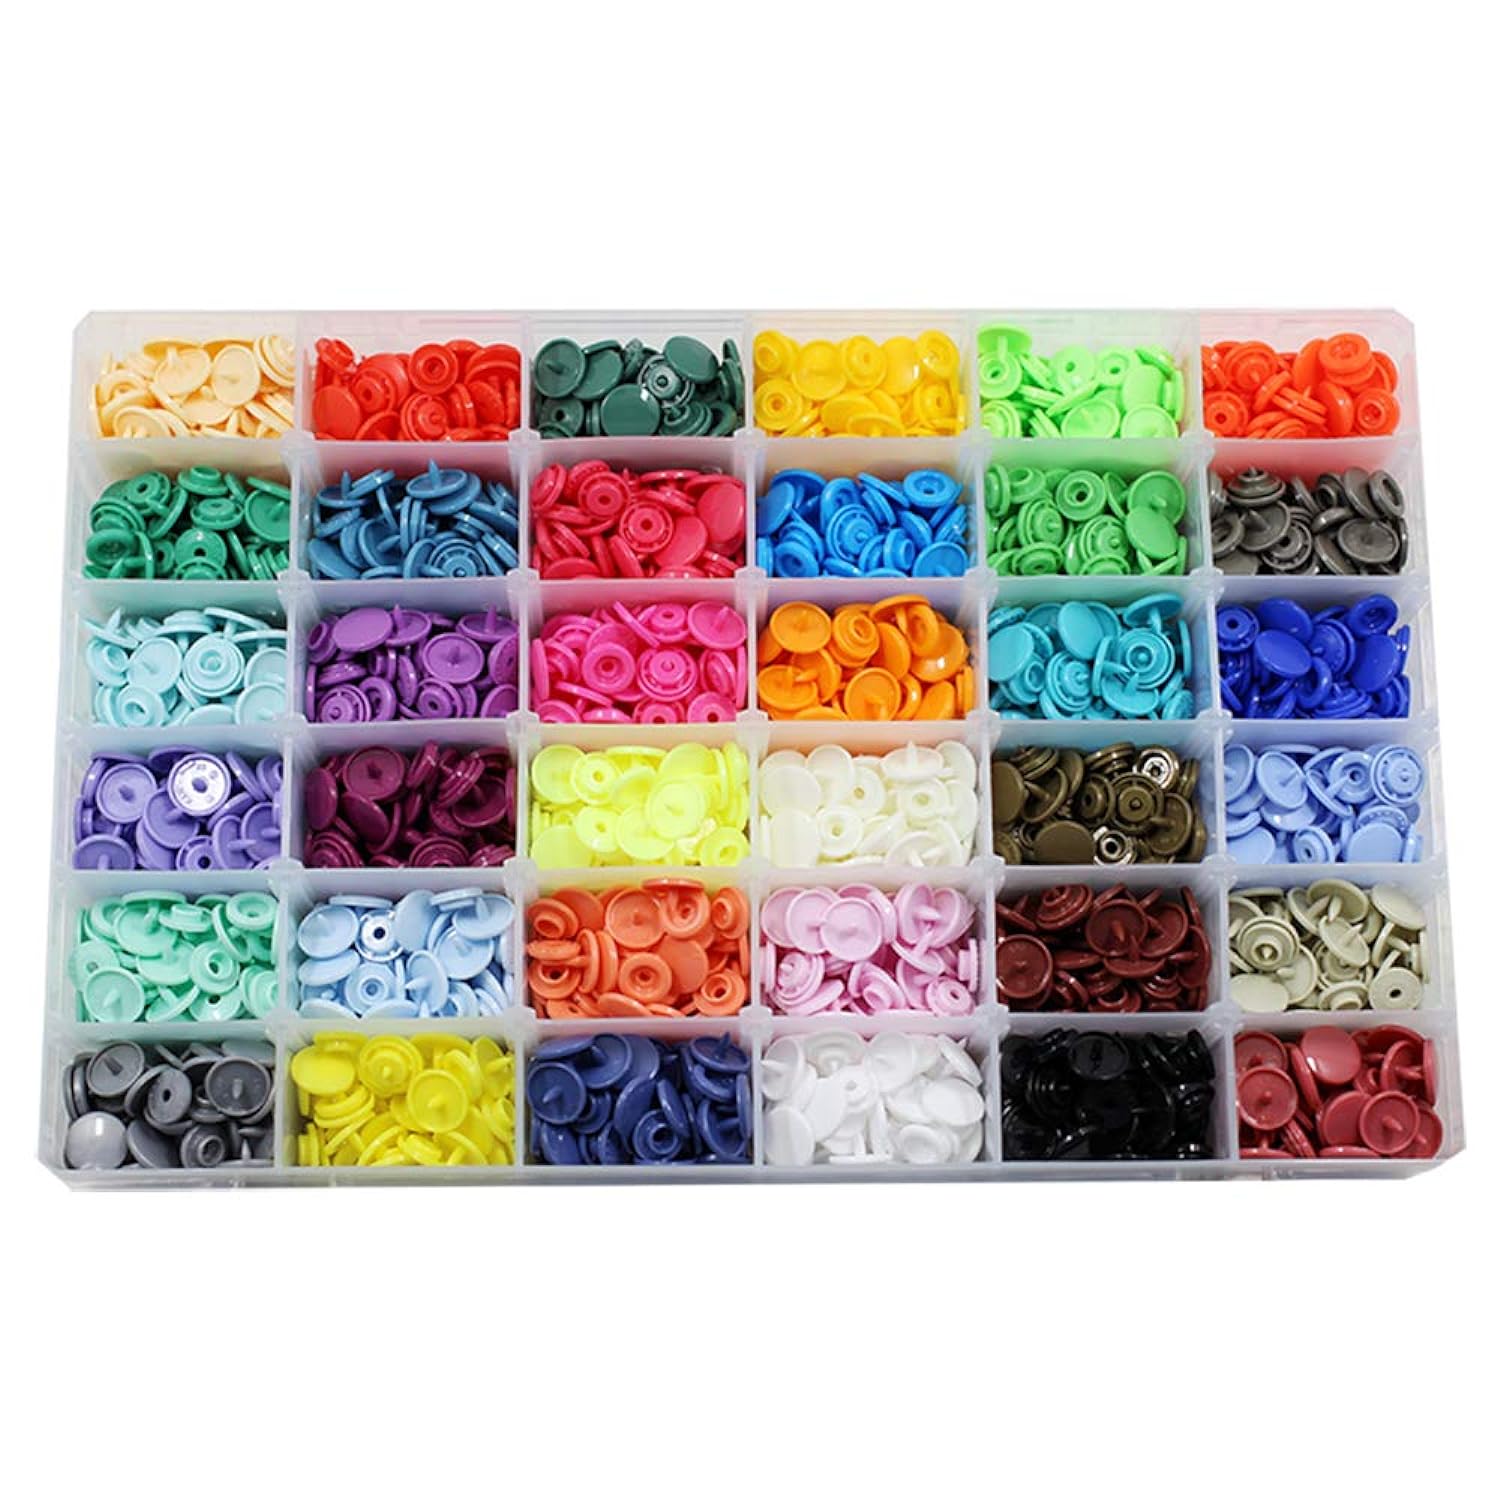 GCP Products 720 Sets 36 Color Kam Snaps Buttons With Storage